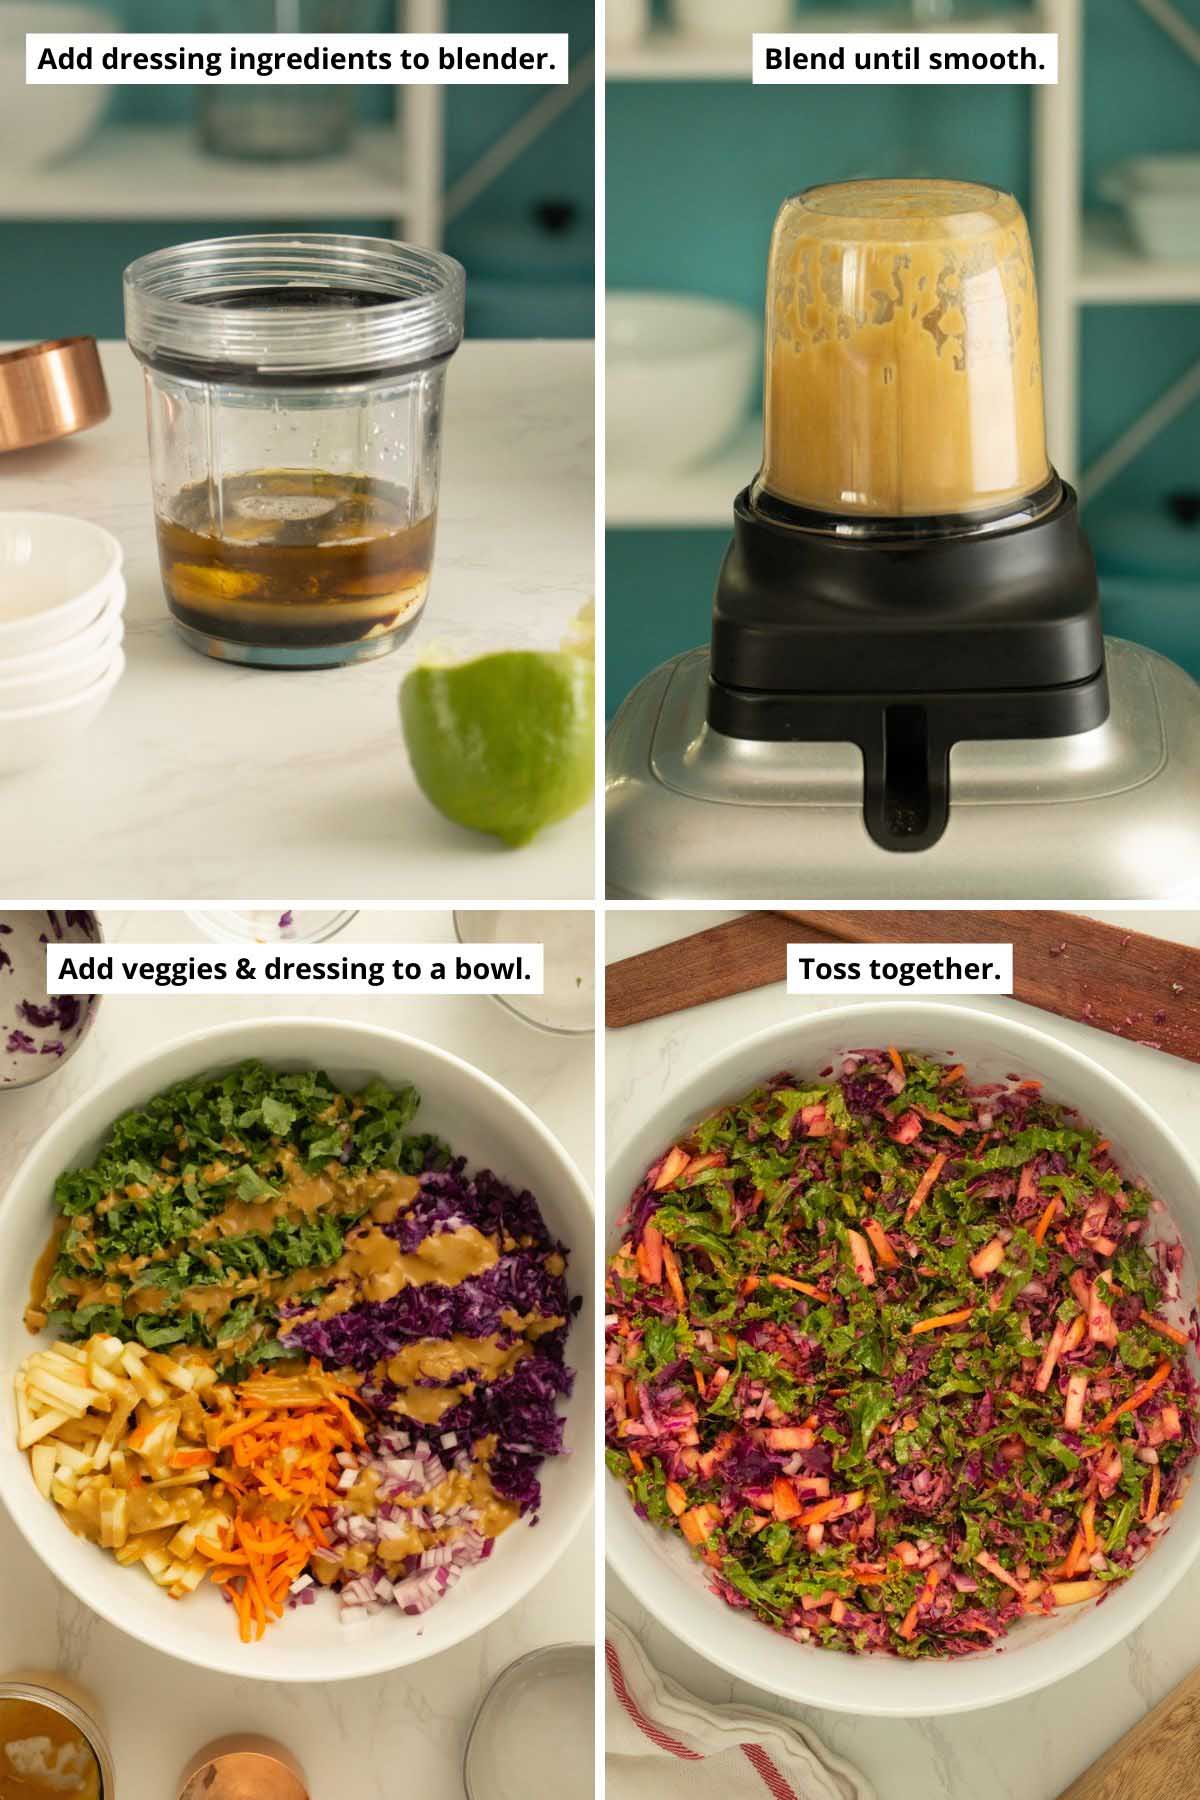 image collage showing balsamic ginger dressing in the blender, before and after dressing and the salad ingredients in the serving bowl, before and after tossing together